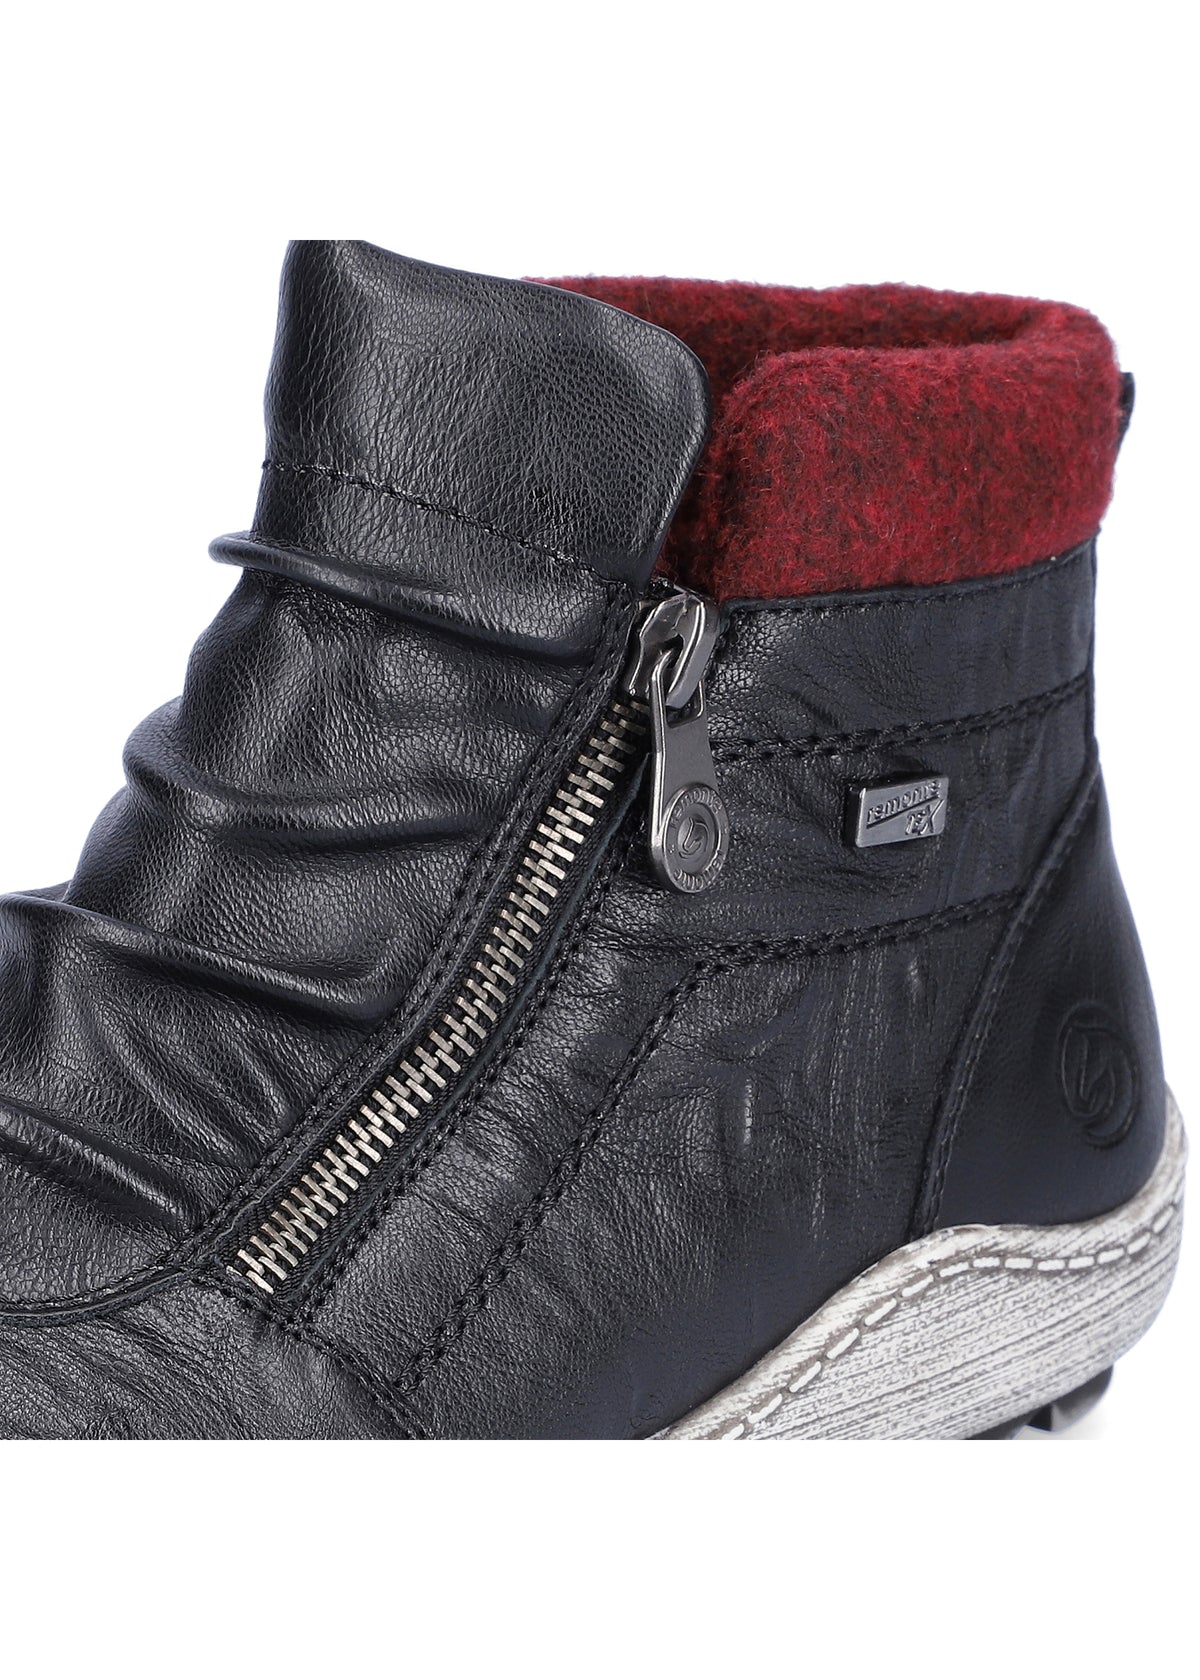 Winter ankle boots - black, Remonte-TEX